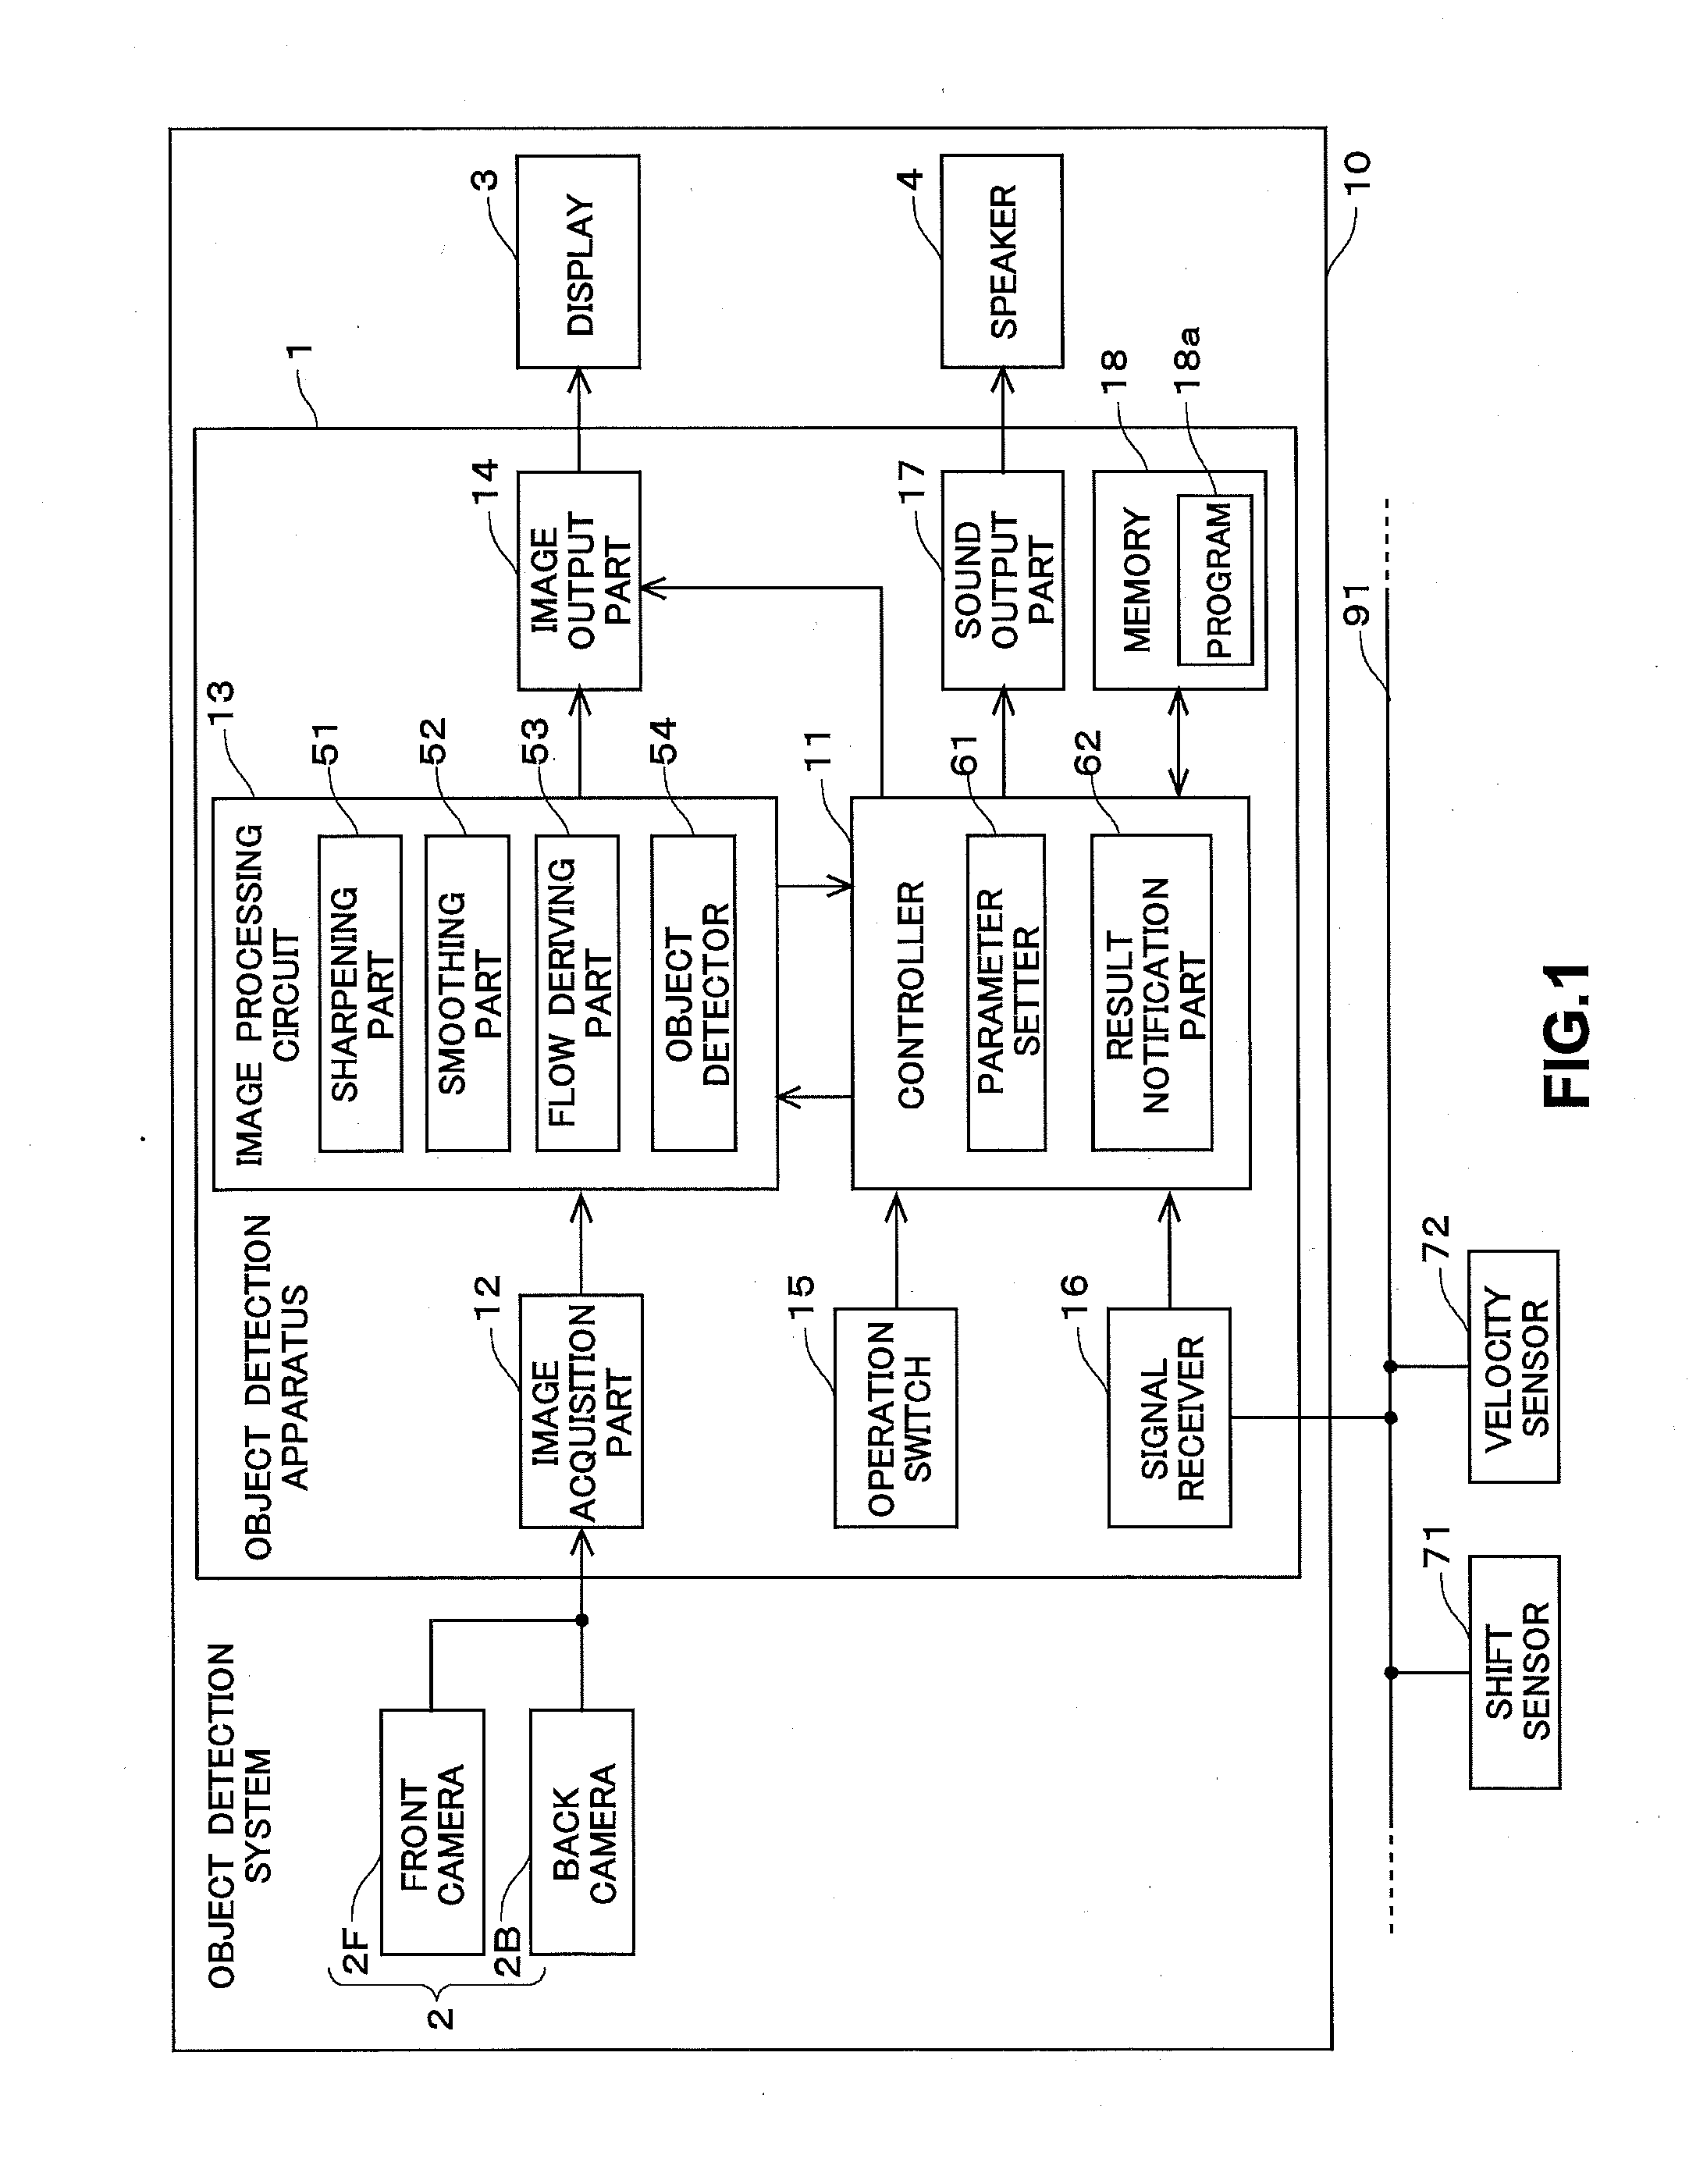 Object detection apparatus